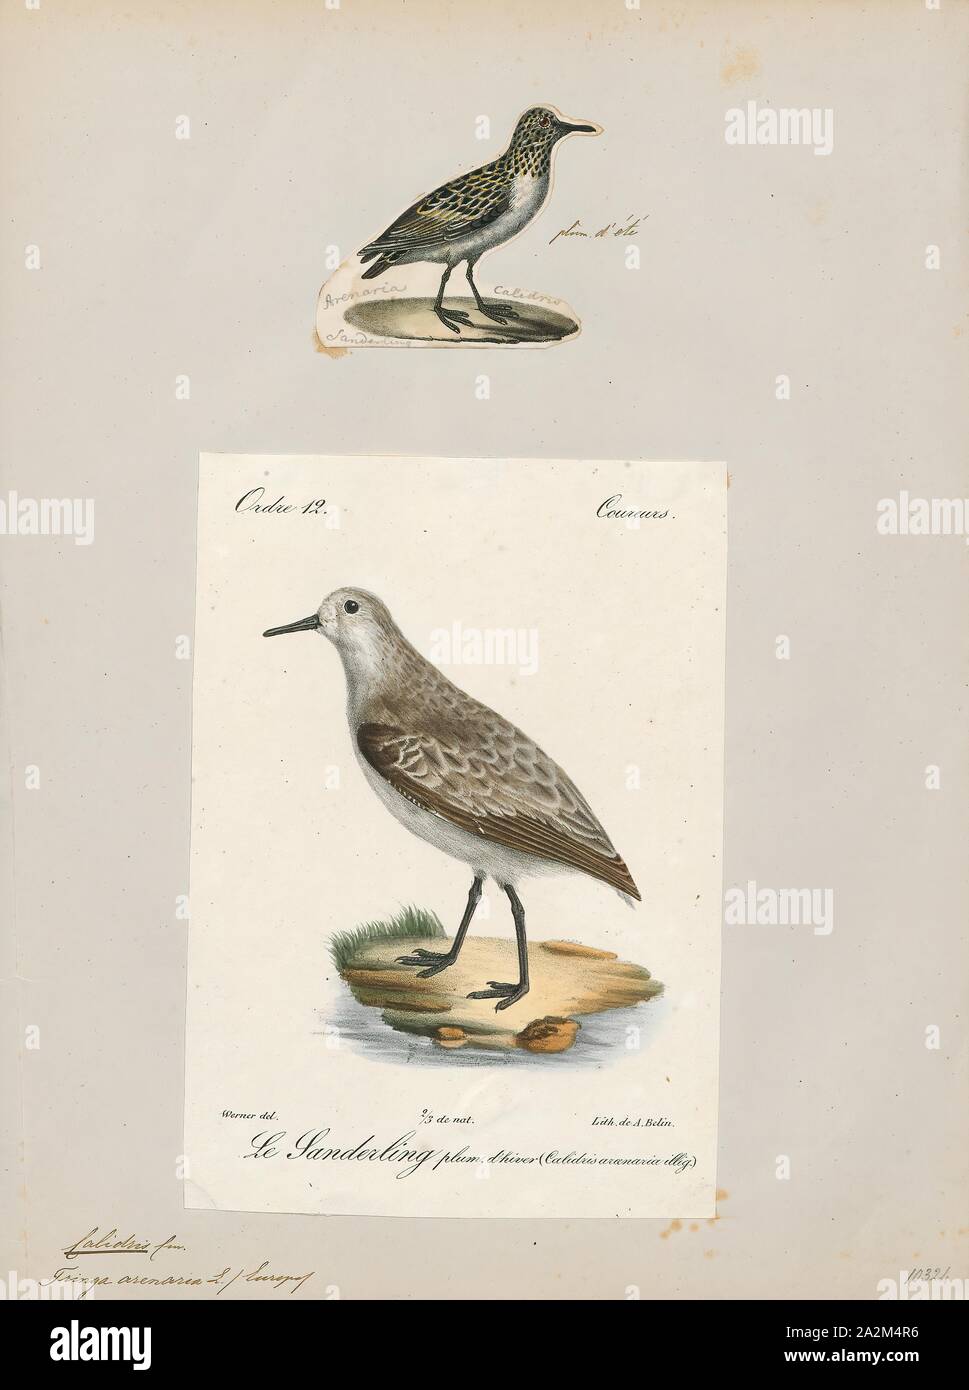 Calidris arenaria, Print, Calidris is a genus of Arctic-breeding, strongly migratory wading birds in the family Scolopacidae. The genus name is from Ancient Greek kalidris or skalidris, a term used by Aristotle for some grey-coloured waterside birds., 1700-1880 Stock Photo